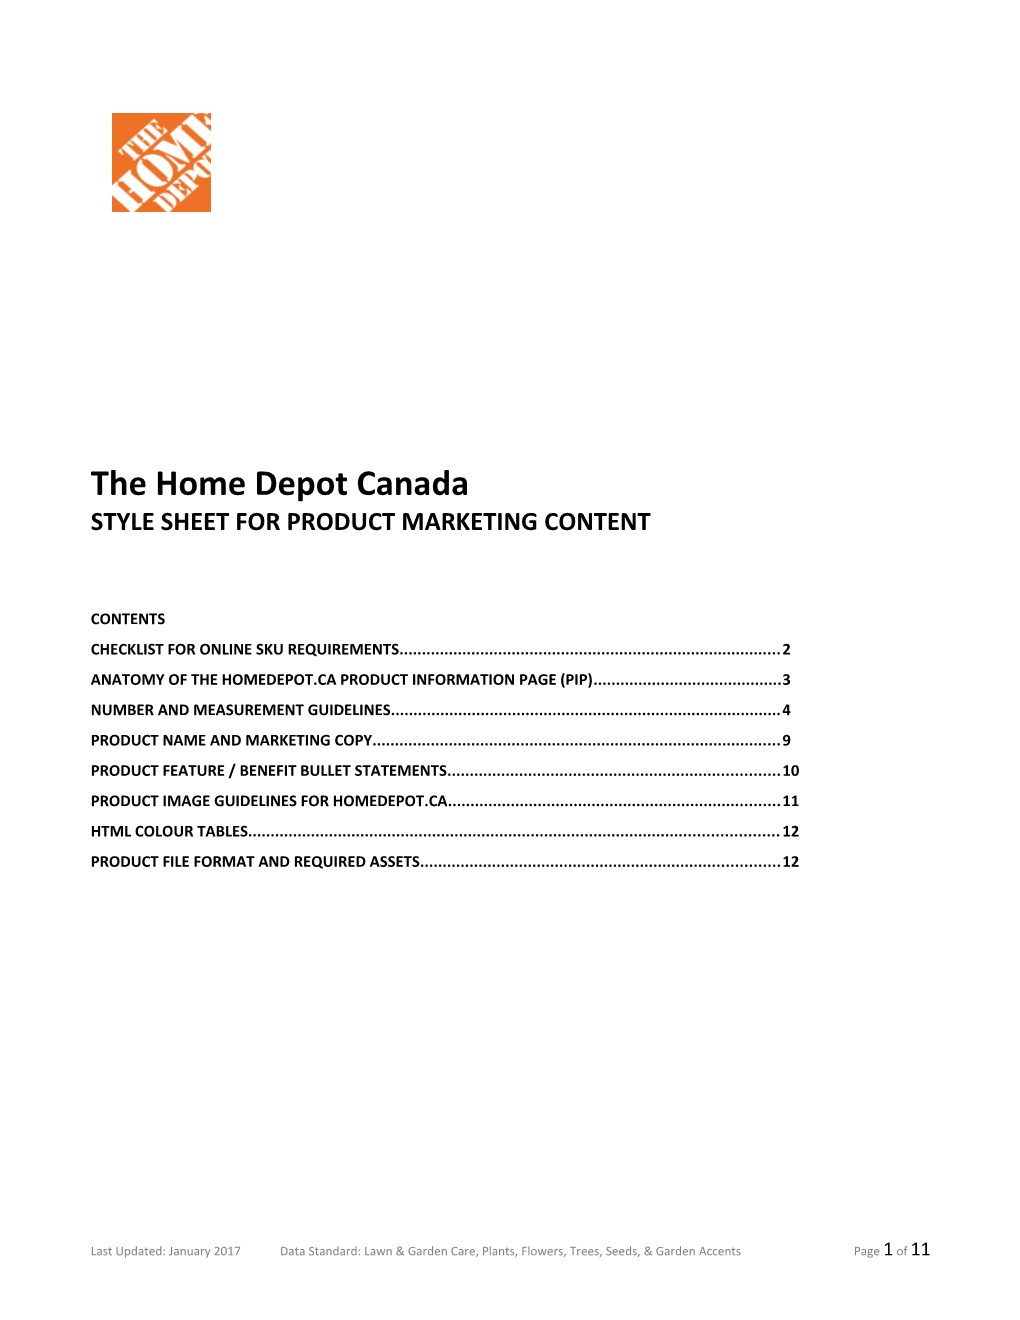 The Home Depot Canada s7